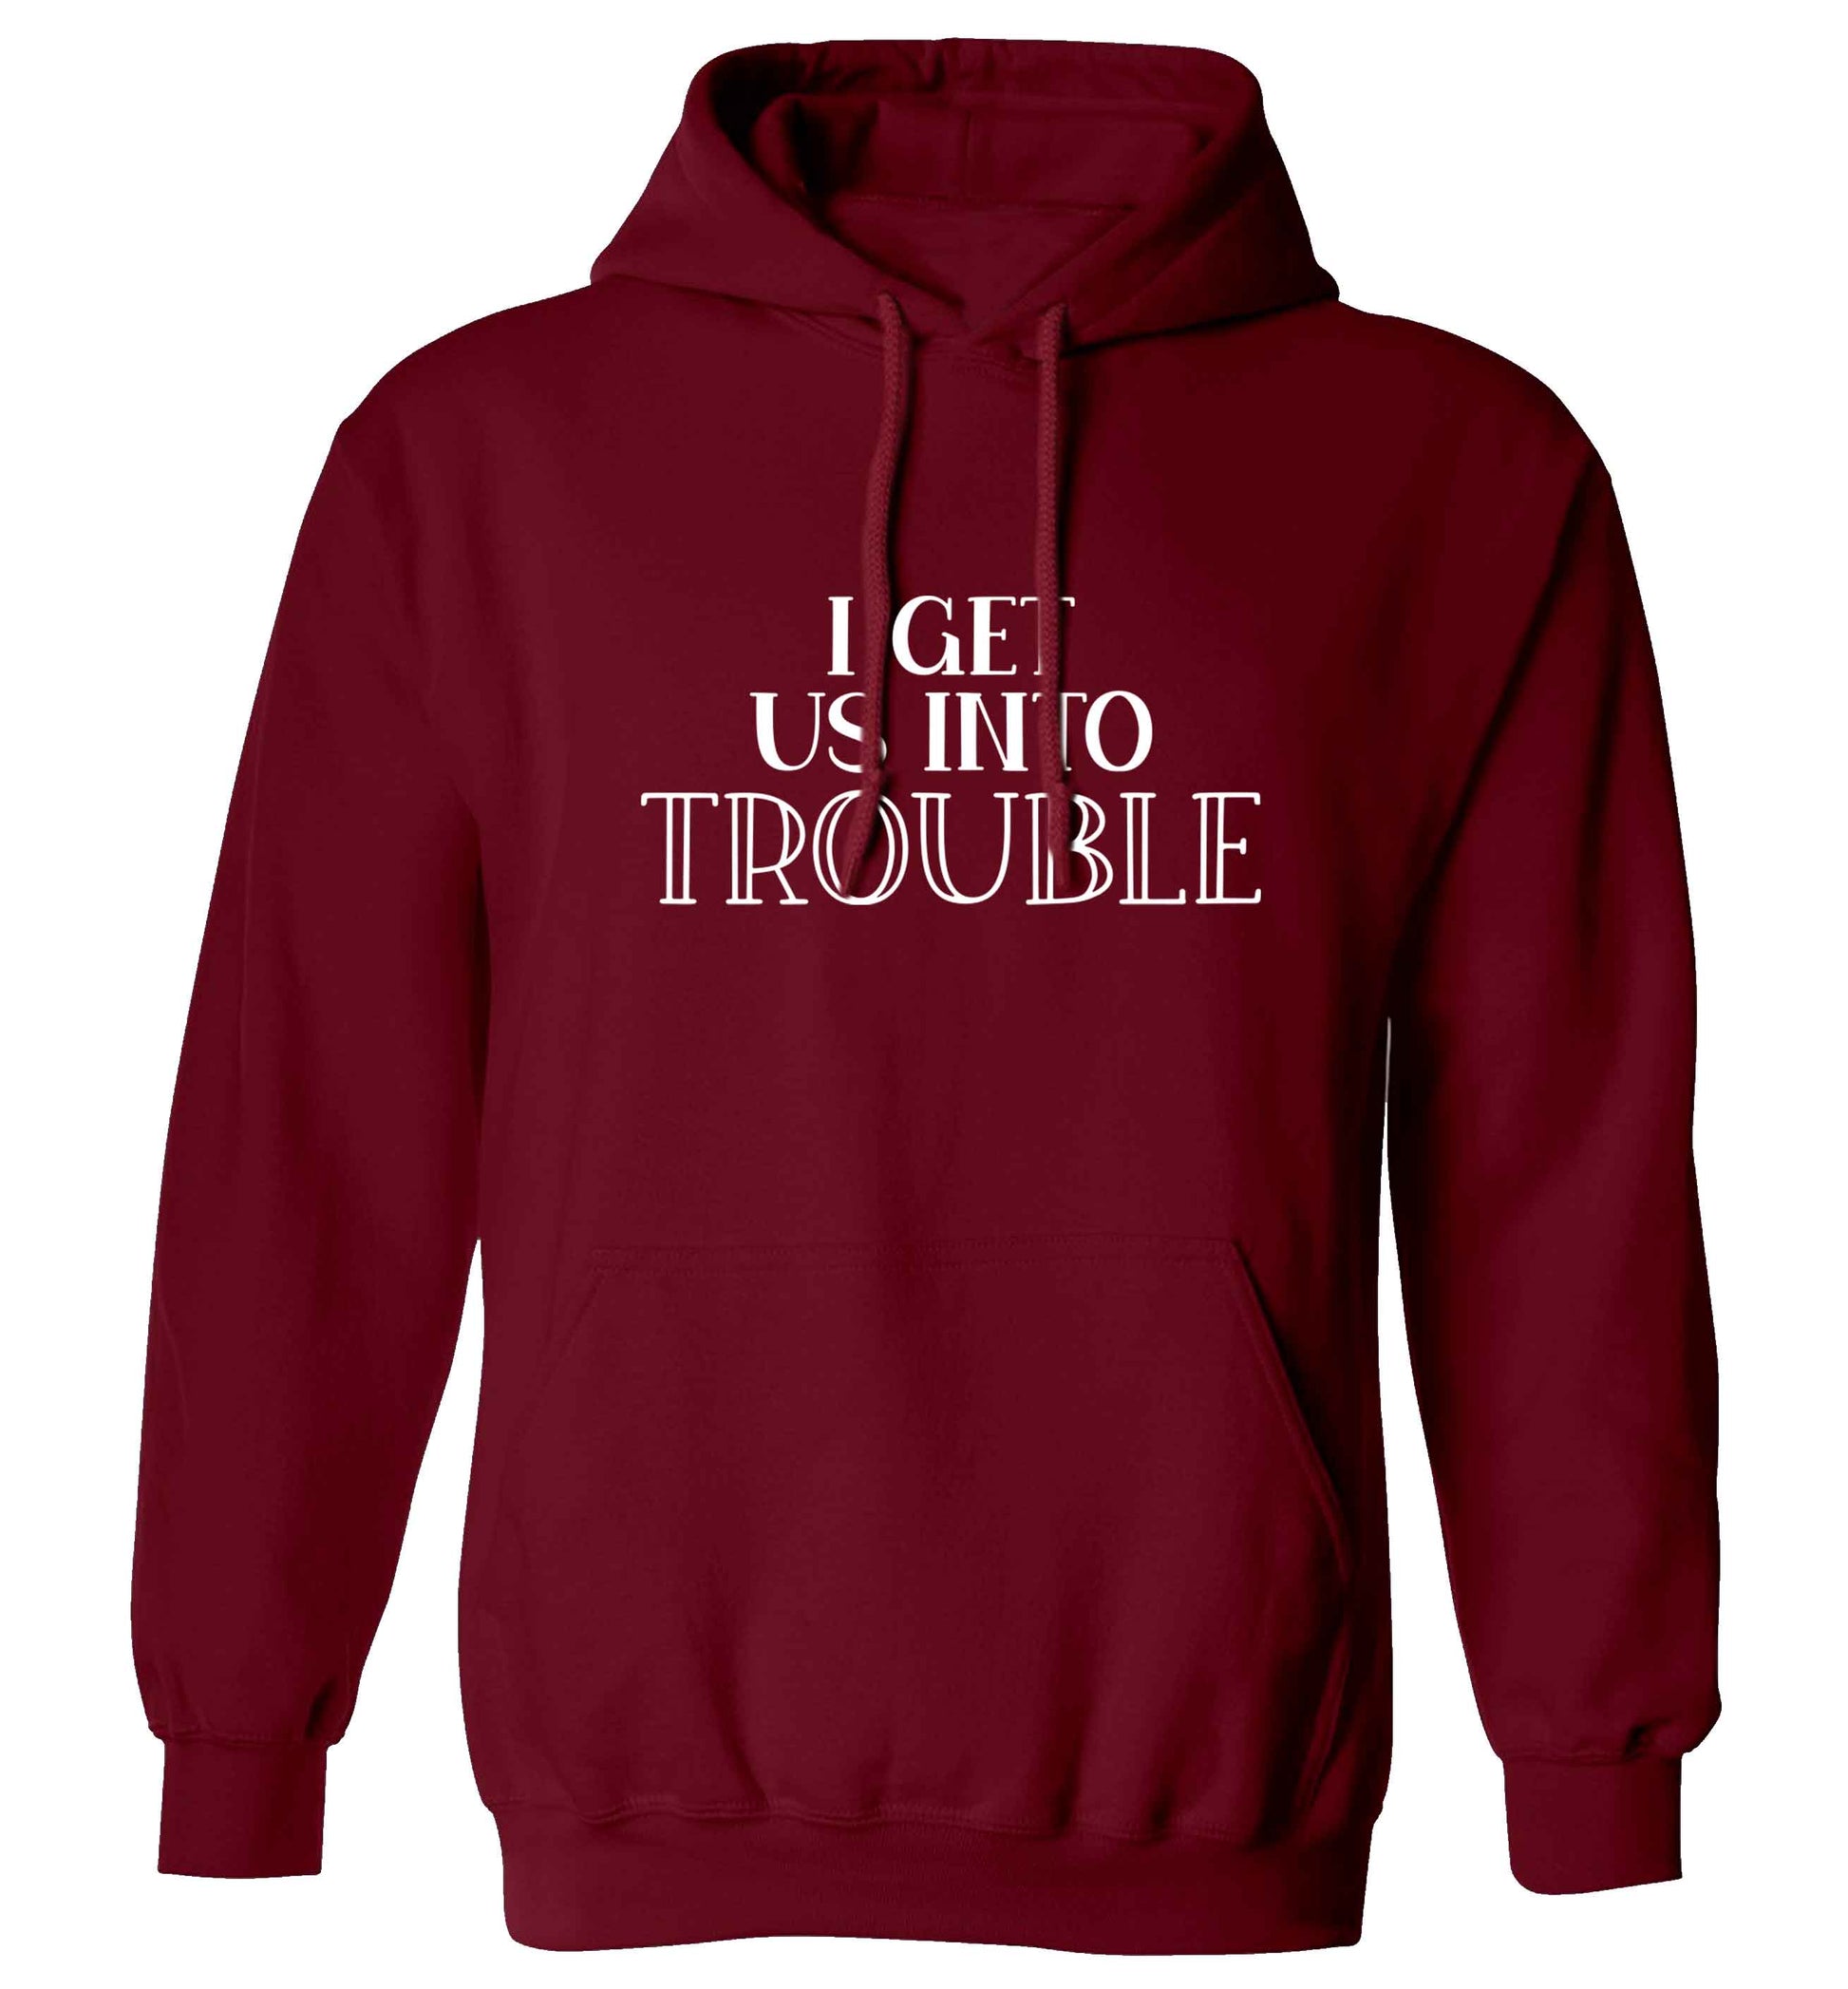 I get us into trouble adults unisex maroon hoodie 2XL